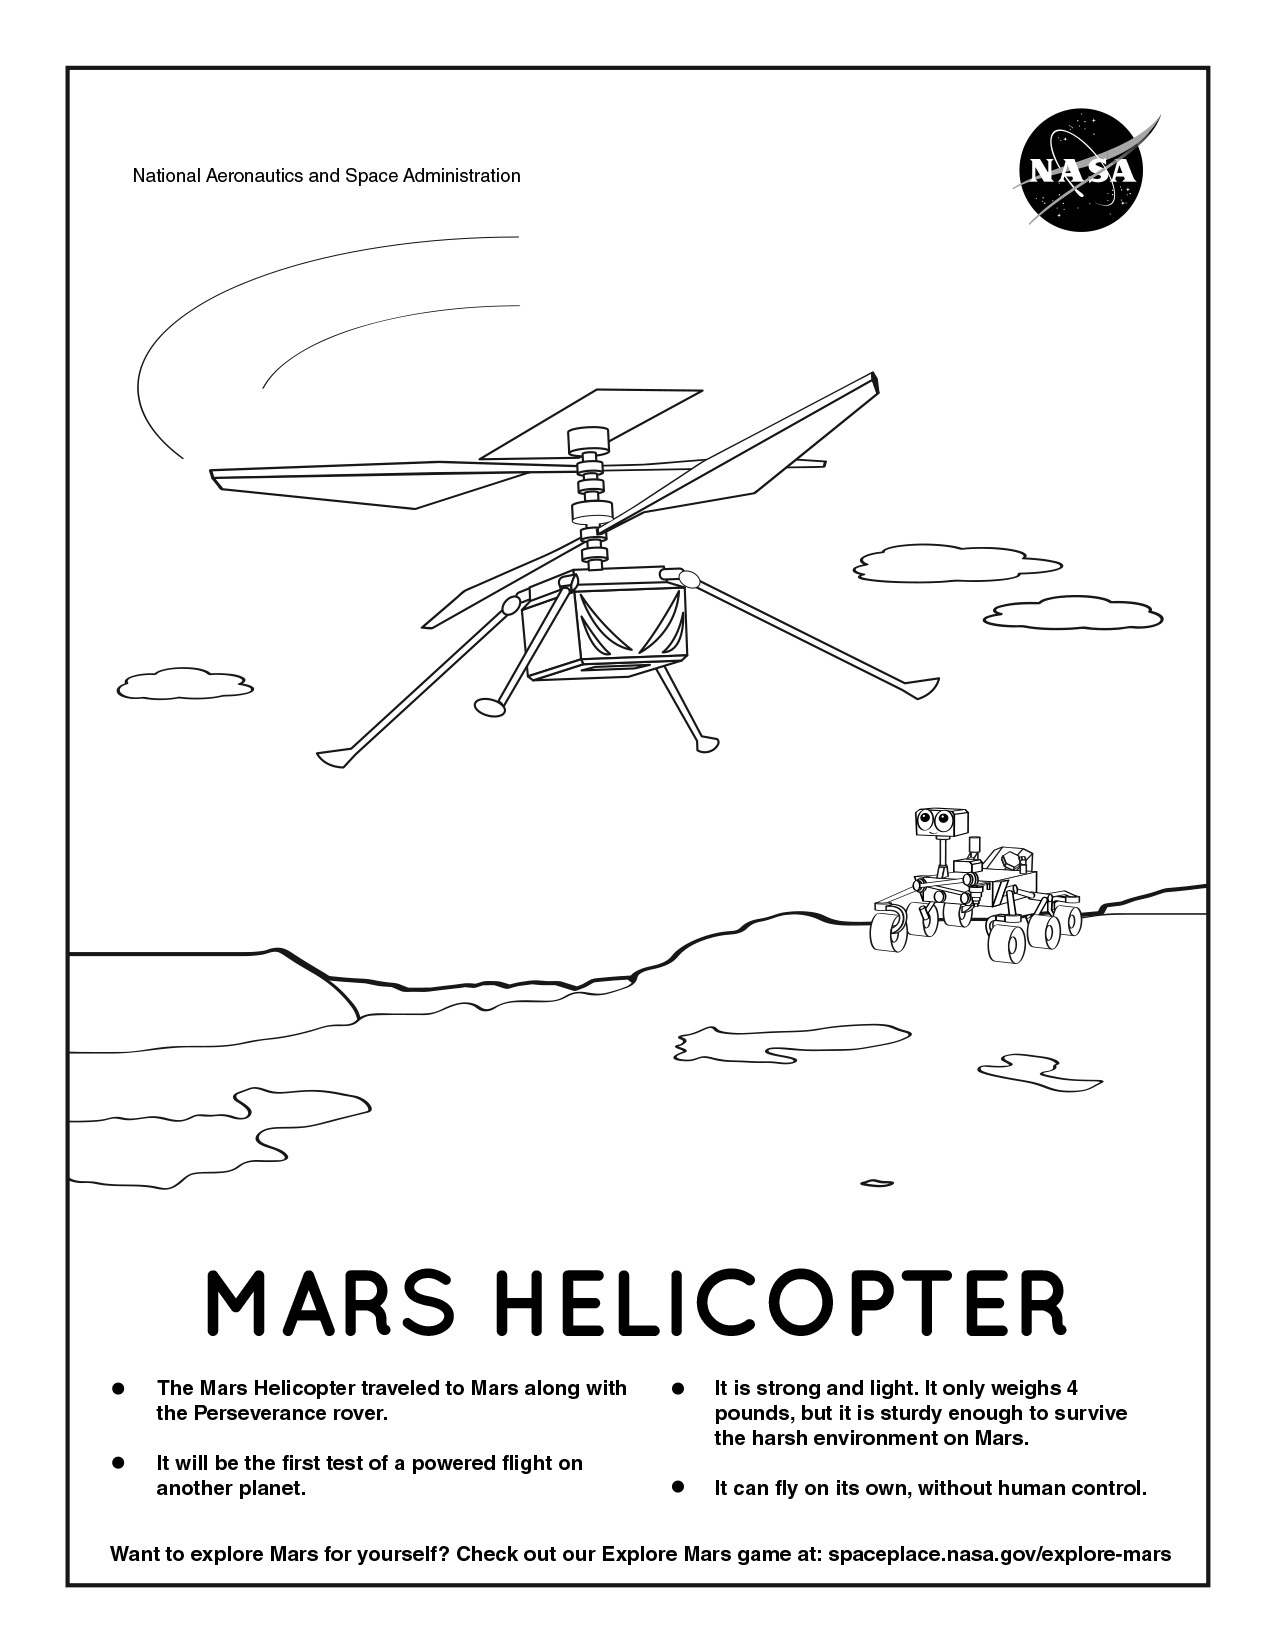 Coloring page for Mars Helicopter.